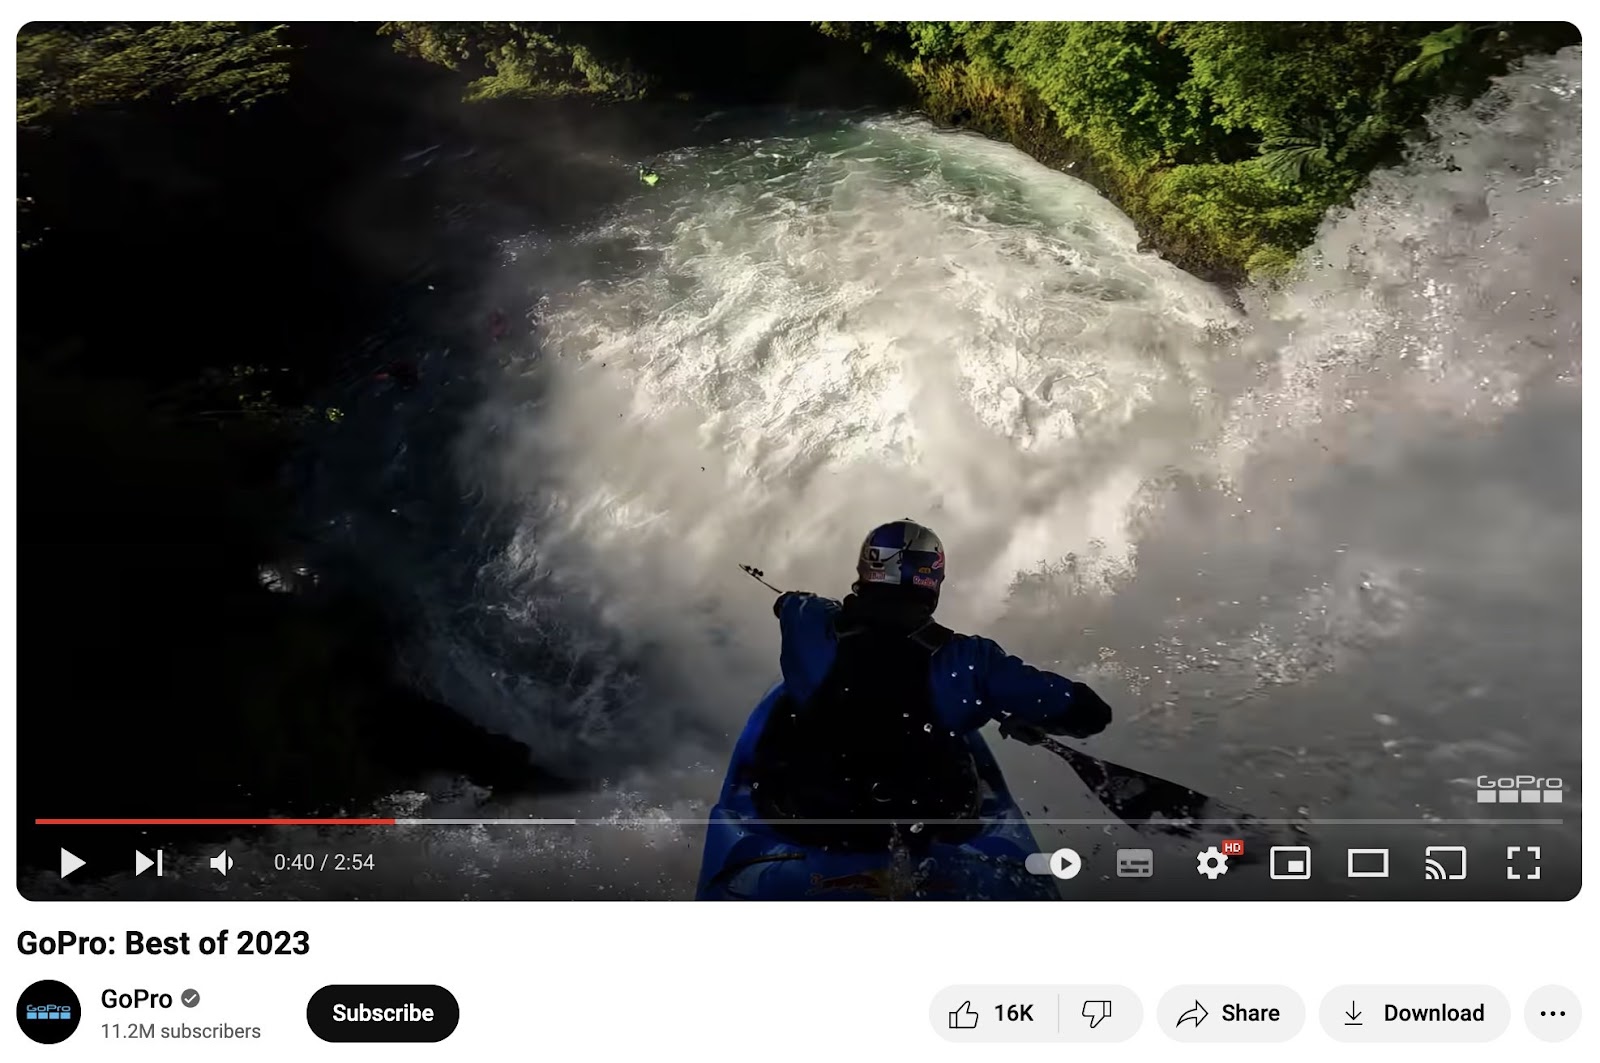 GoPro Best of 2023 YouTube video.